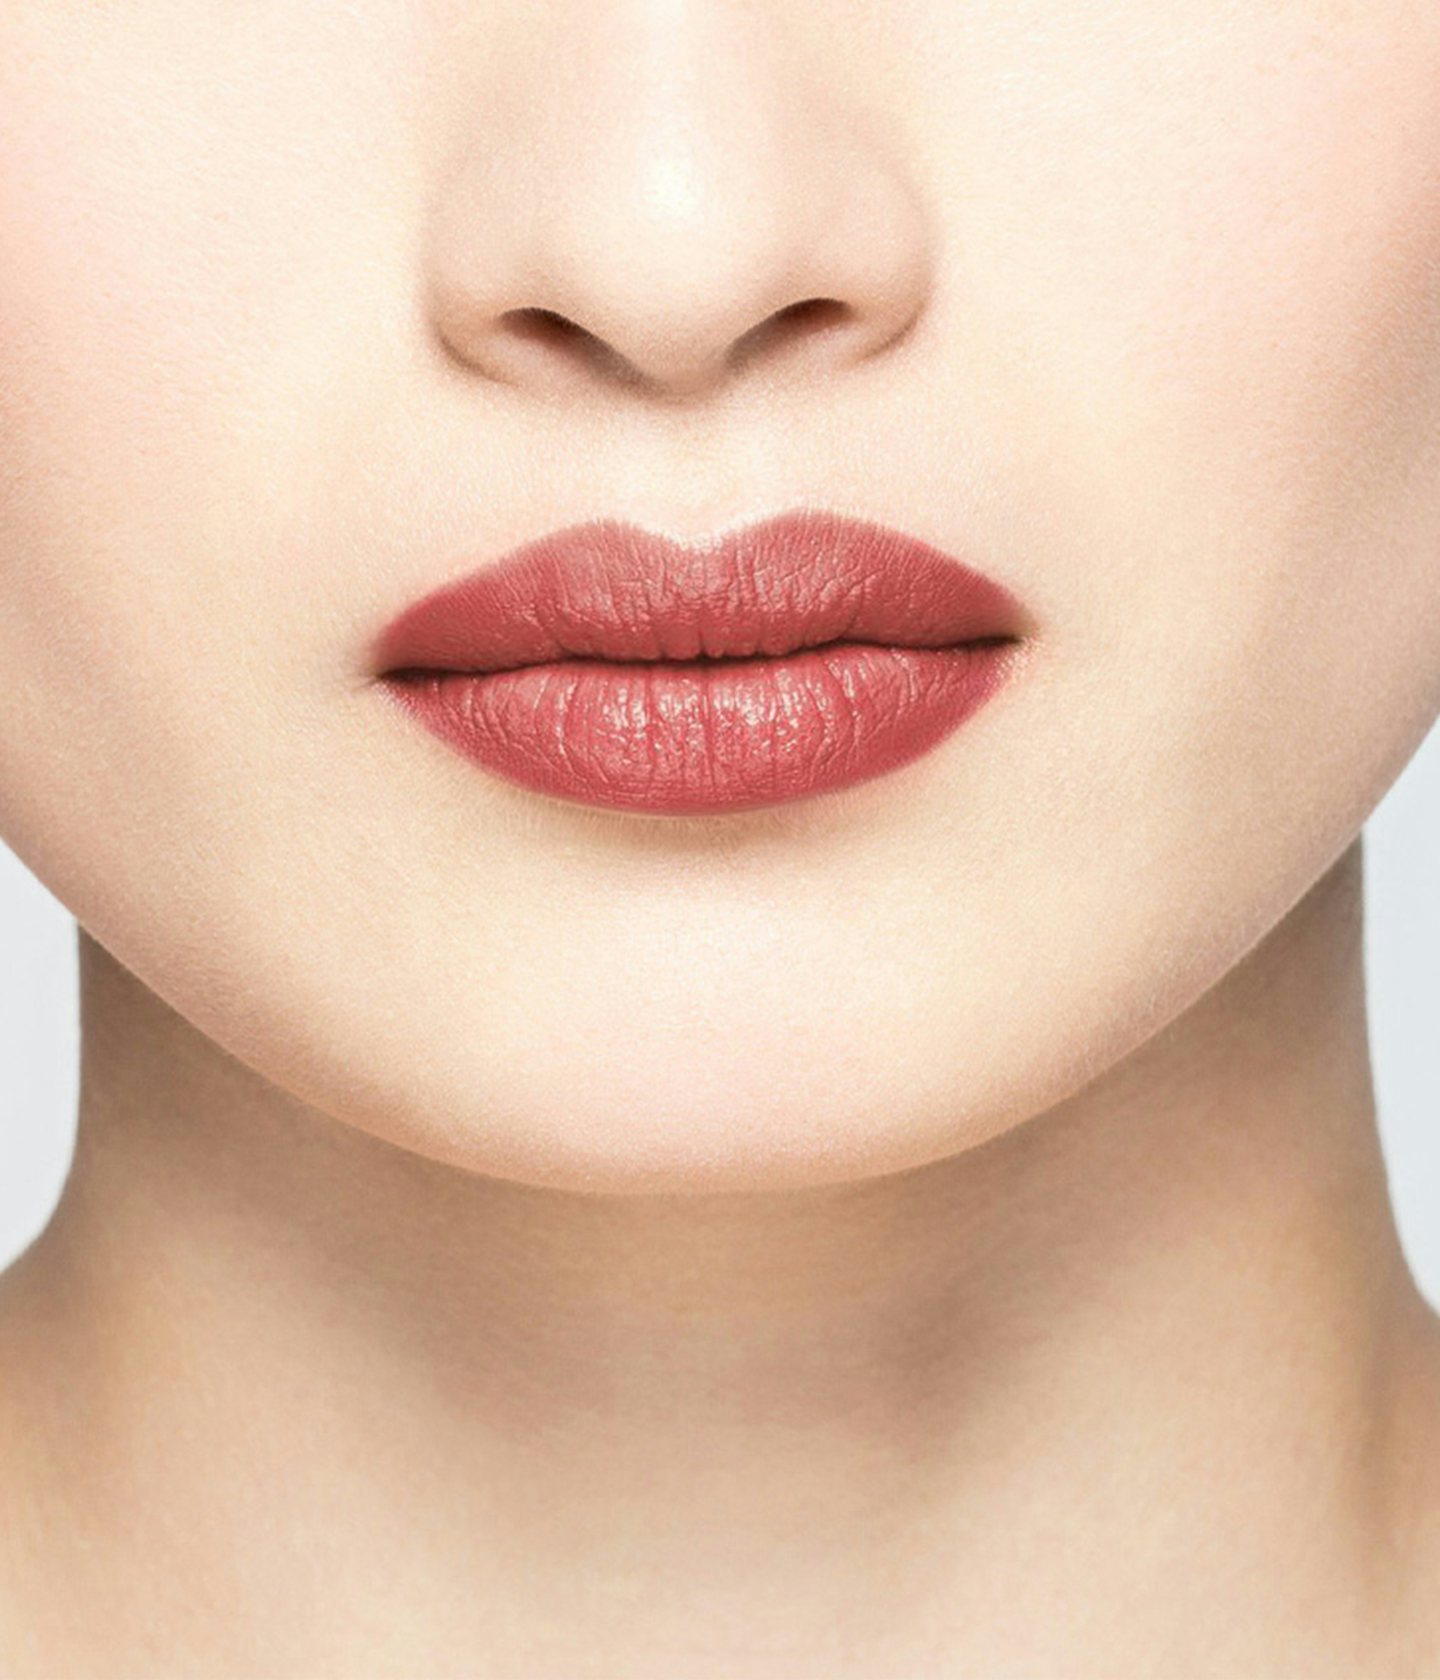 La bouche rouge Nude Brown lipstick shade on the lips of an Asian model